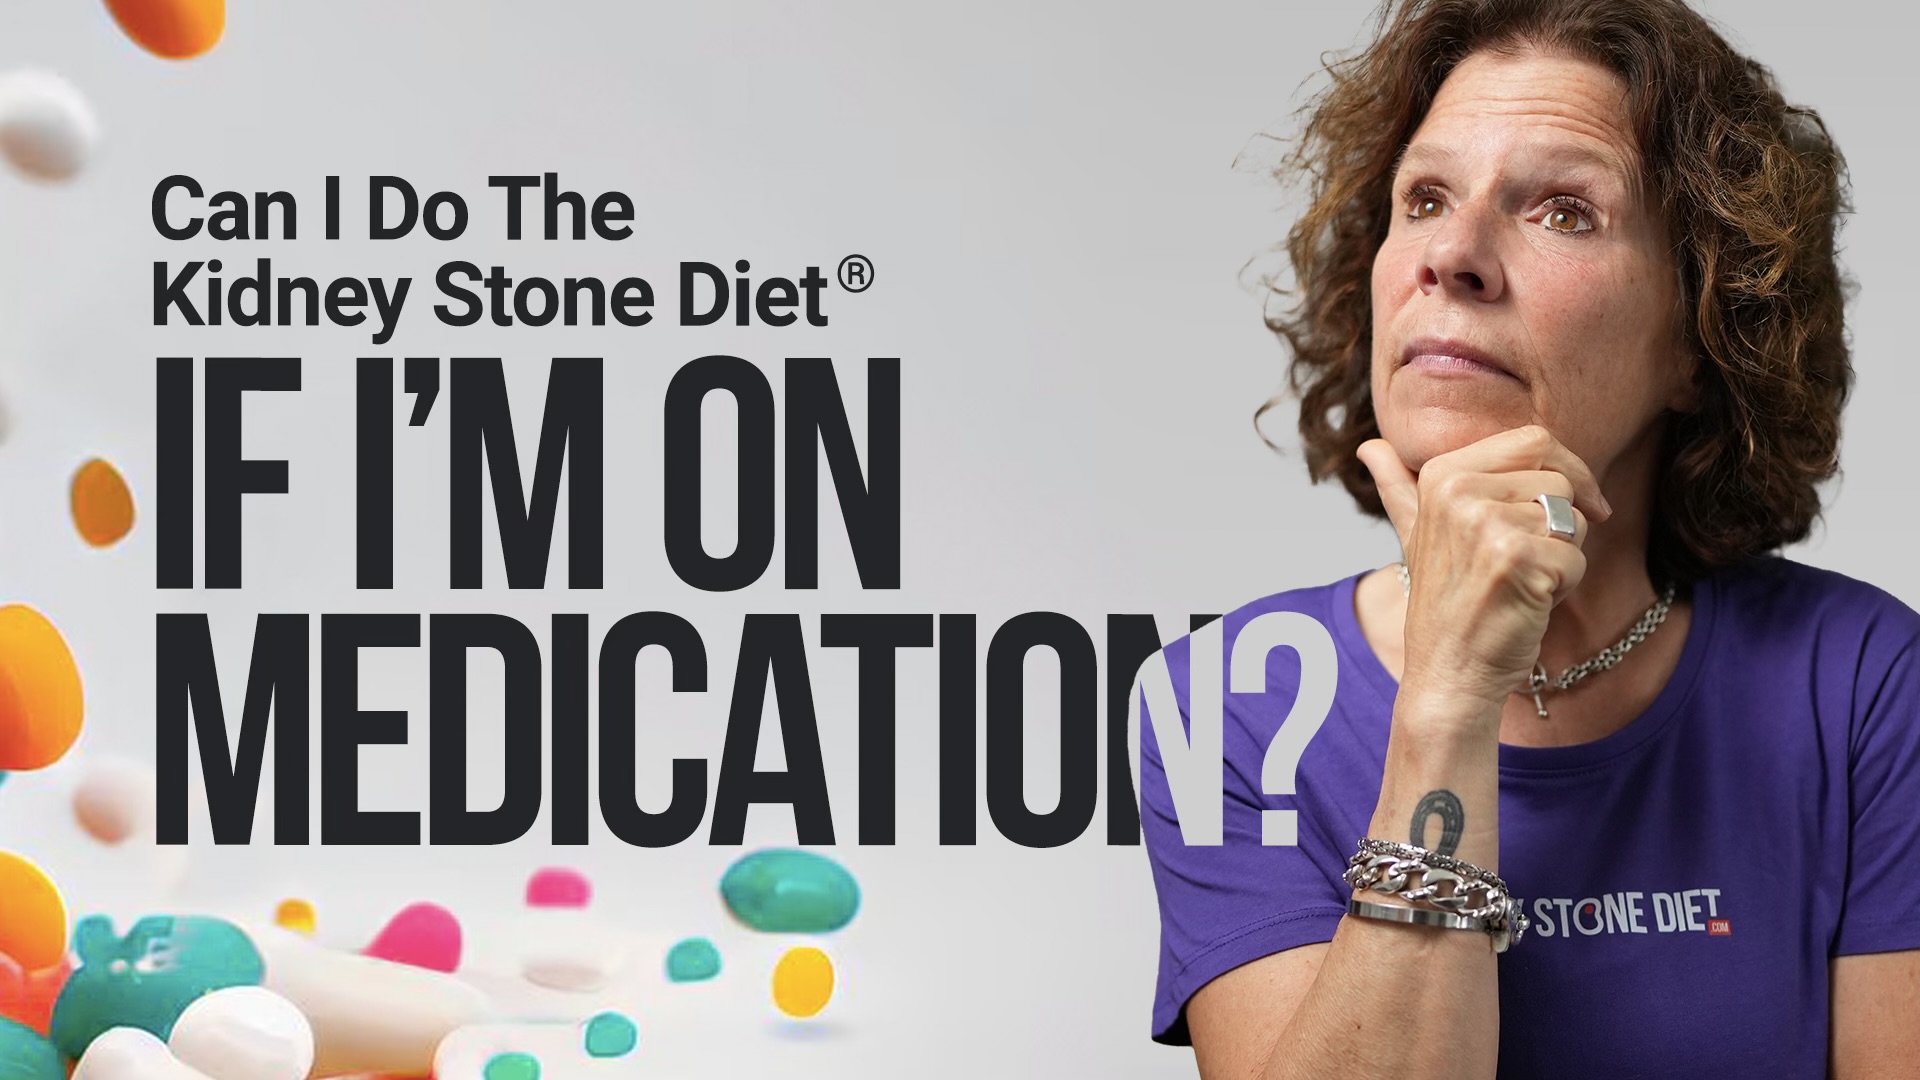 Can I do the Kidney Stone Diet if I’m on medication?